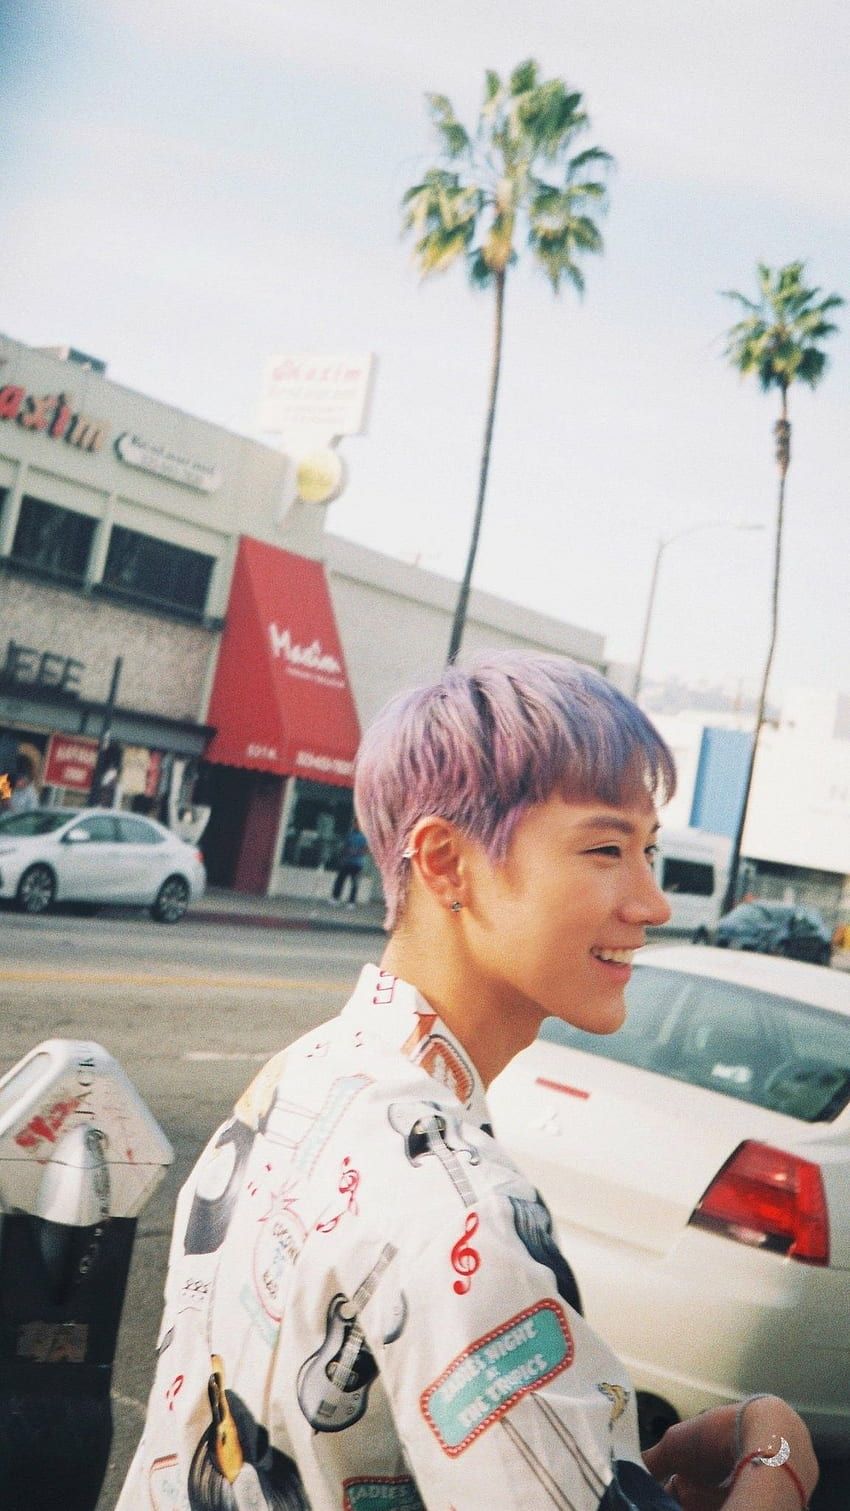 A person with purple hair standing in front of a building. - NCT